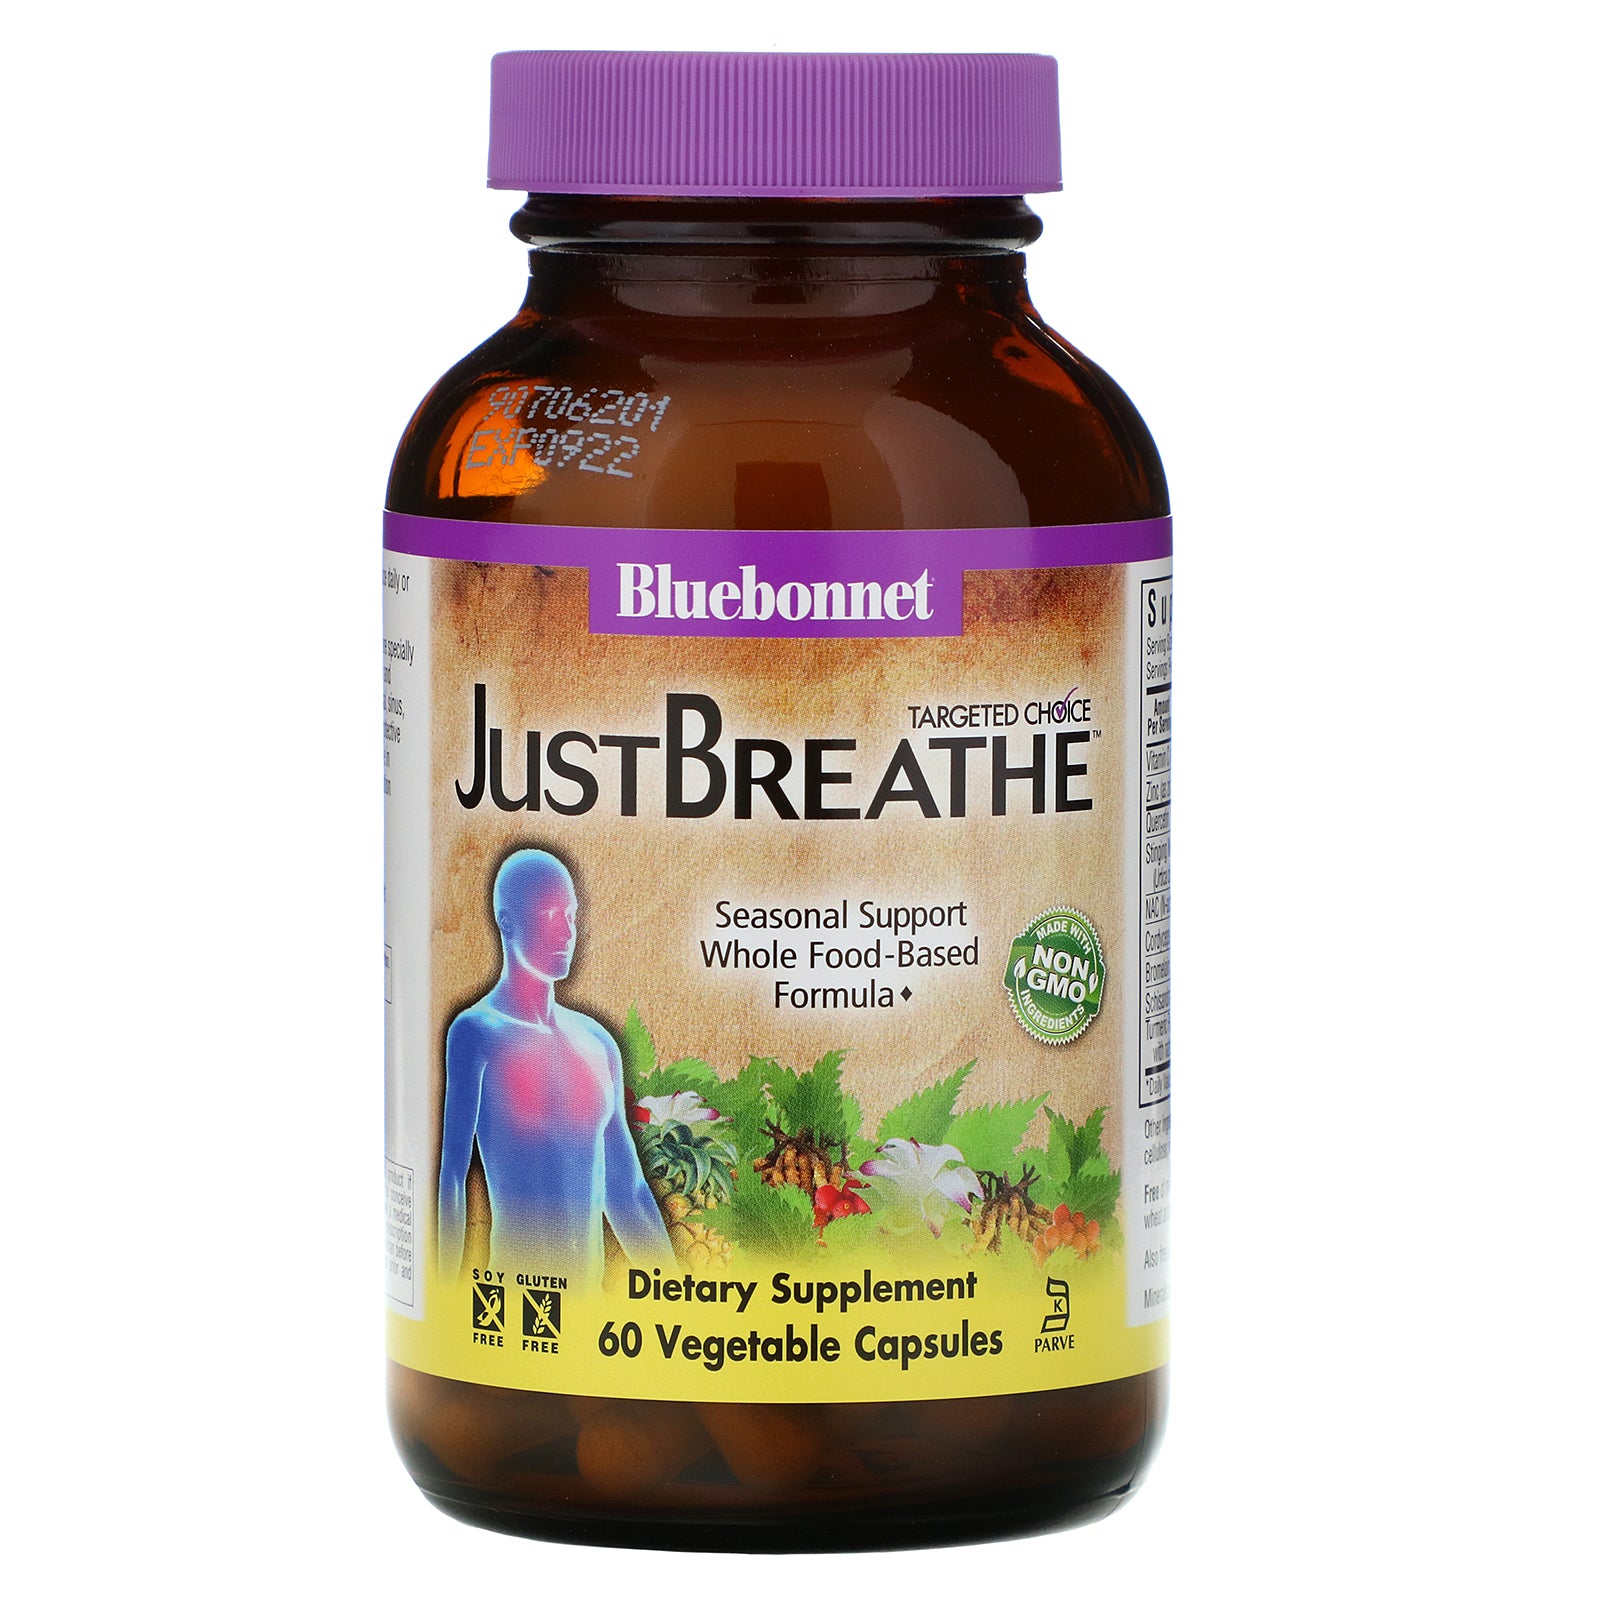 Bluebonnet Nutrition, Targeted Choice, JustBreathe, 60 Vegetable Capsules